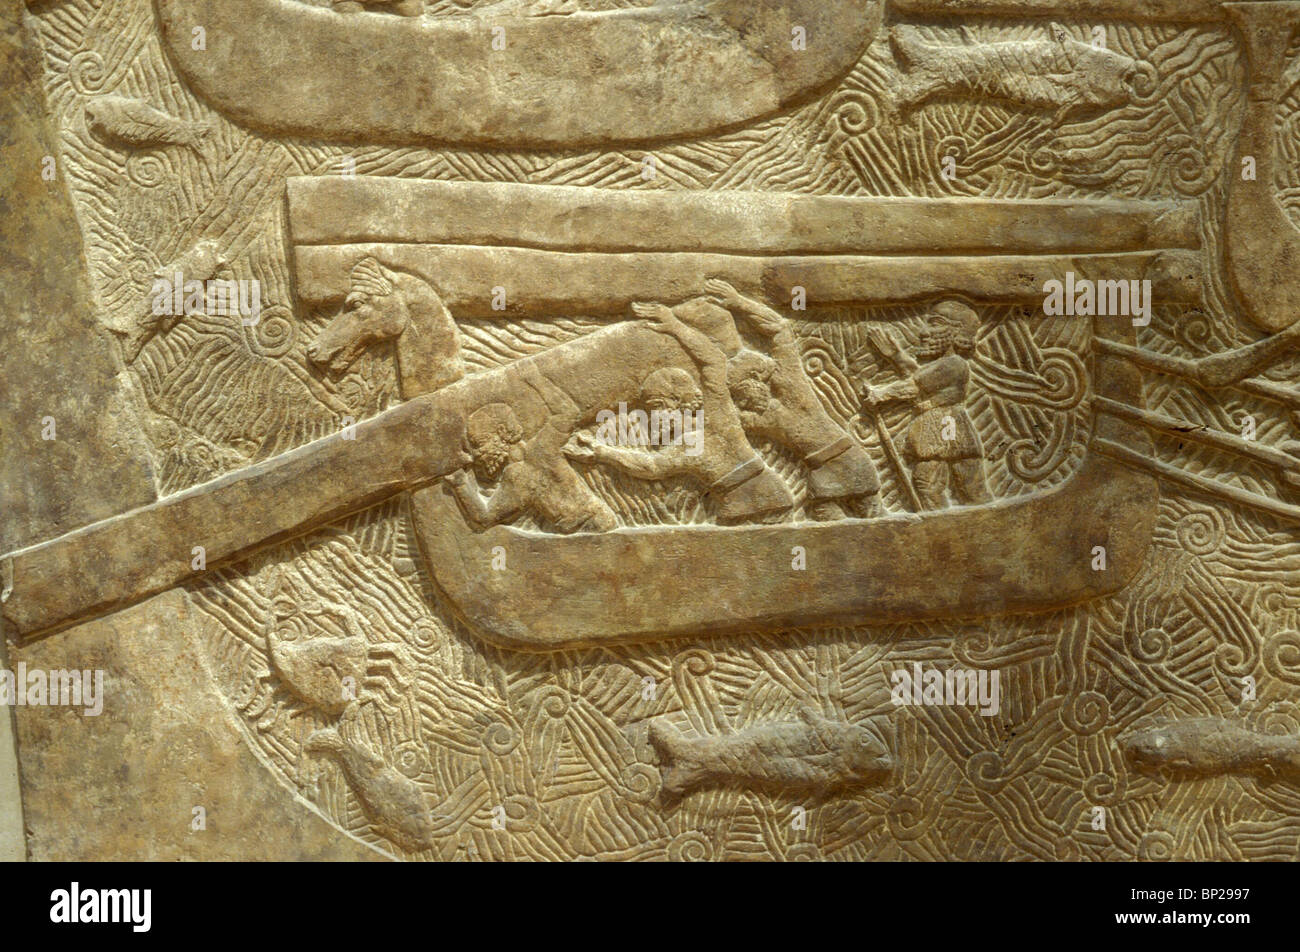 BOATS WITH HORSE-HEAD SHAPED PROW TRANSPORTING LOGS. RELIEF FROM THE PALACE OF KING SARAGON II IN KHORSABAD 721 - 705 B.C. KING Stock Photo